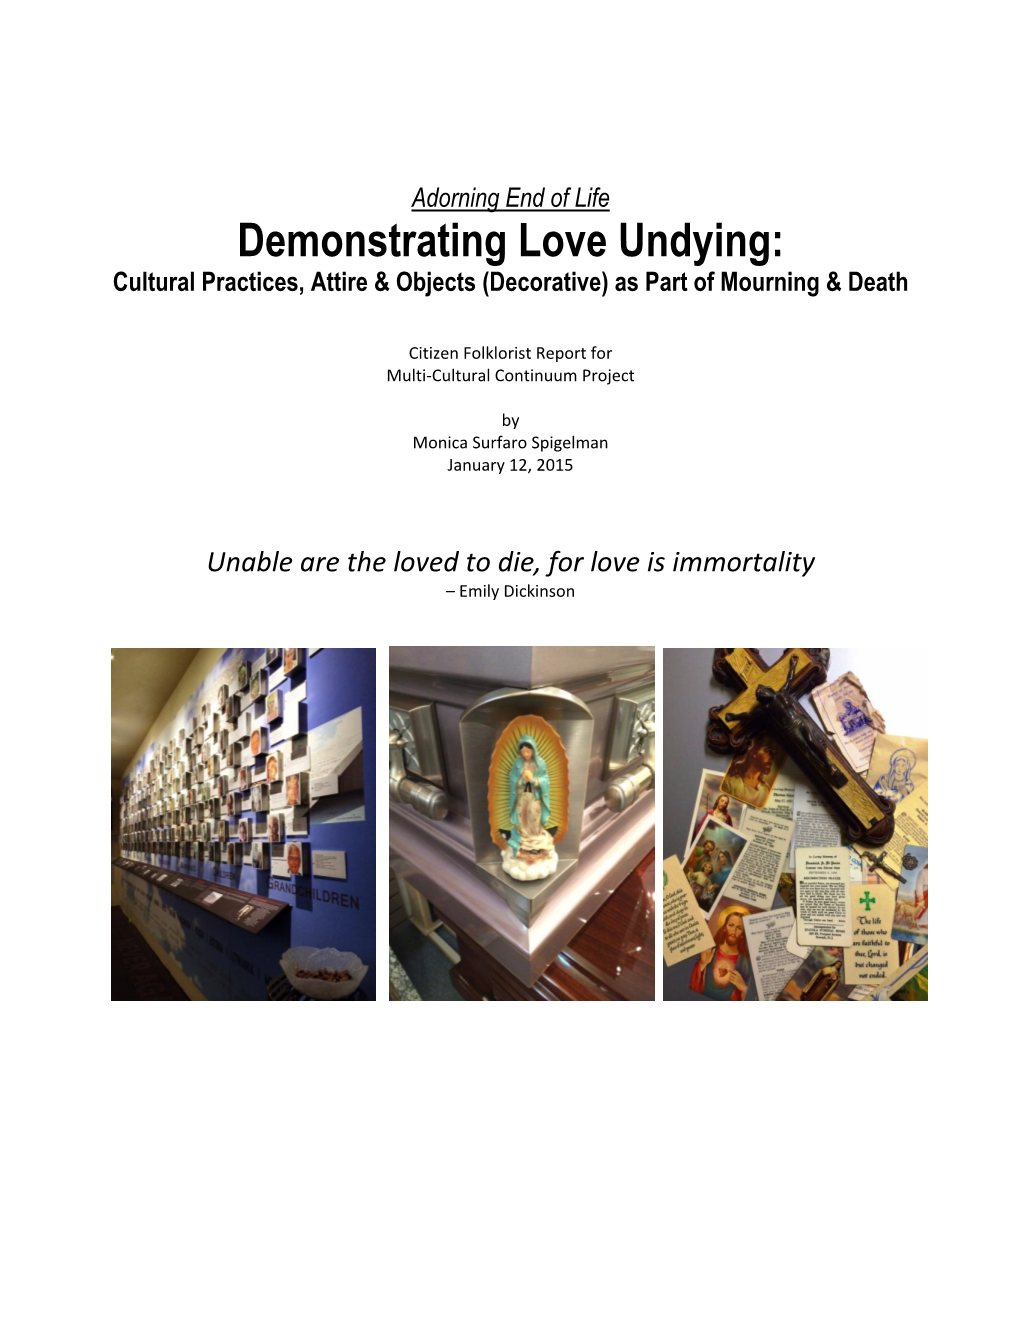 Demonstrating Love Undying: Cultural Practices, Attire & Objects (Decorative) As Part of Mourning & Death